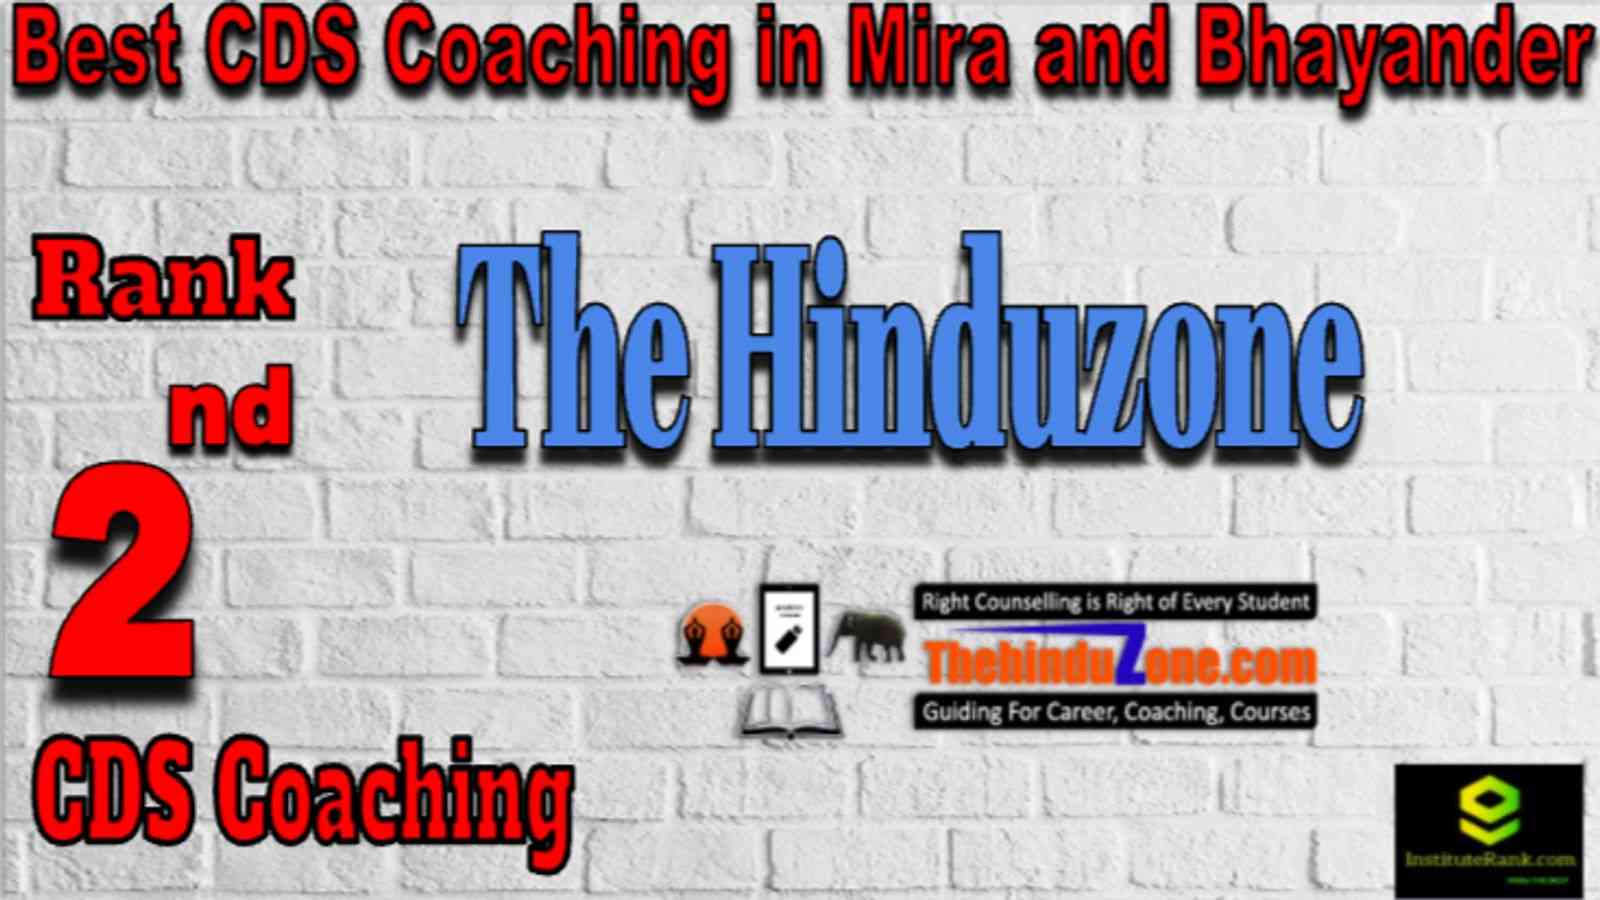 Rank 2 Best CDS Coaching in Mira and Bhayander